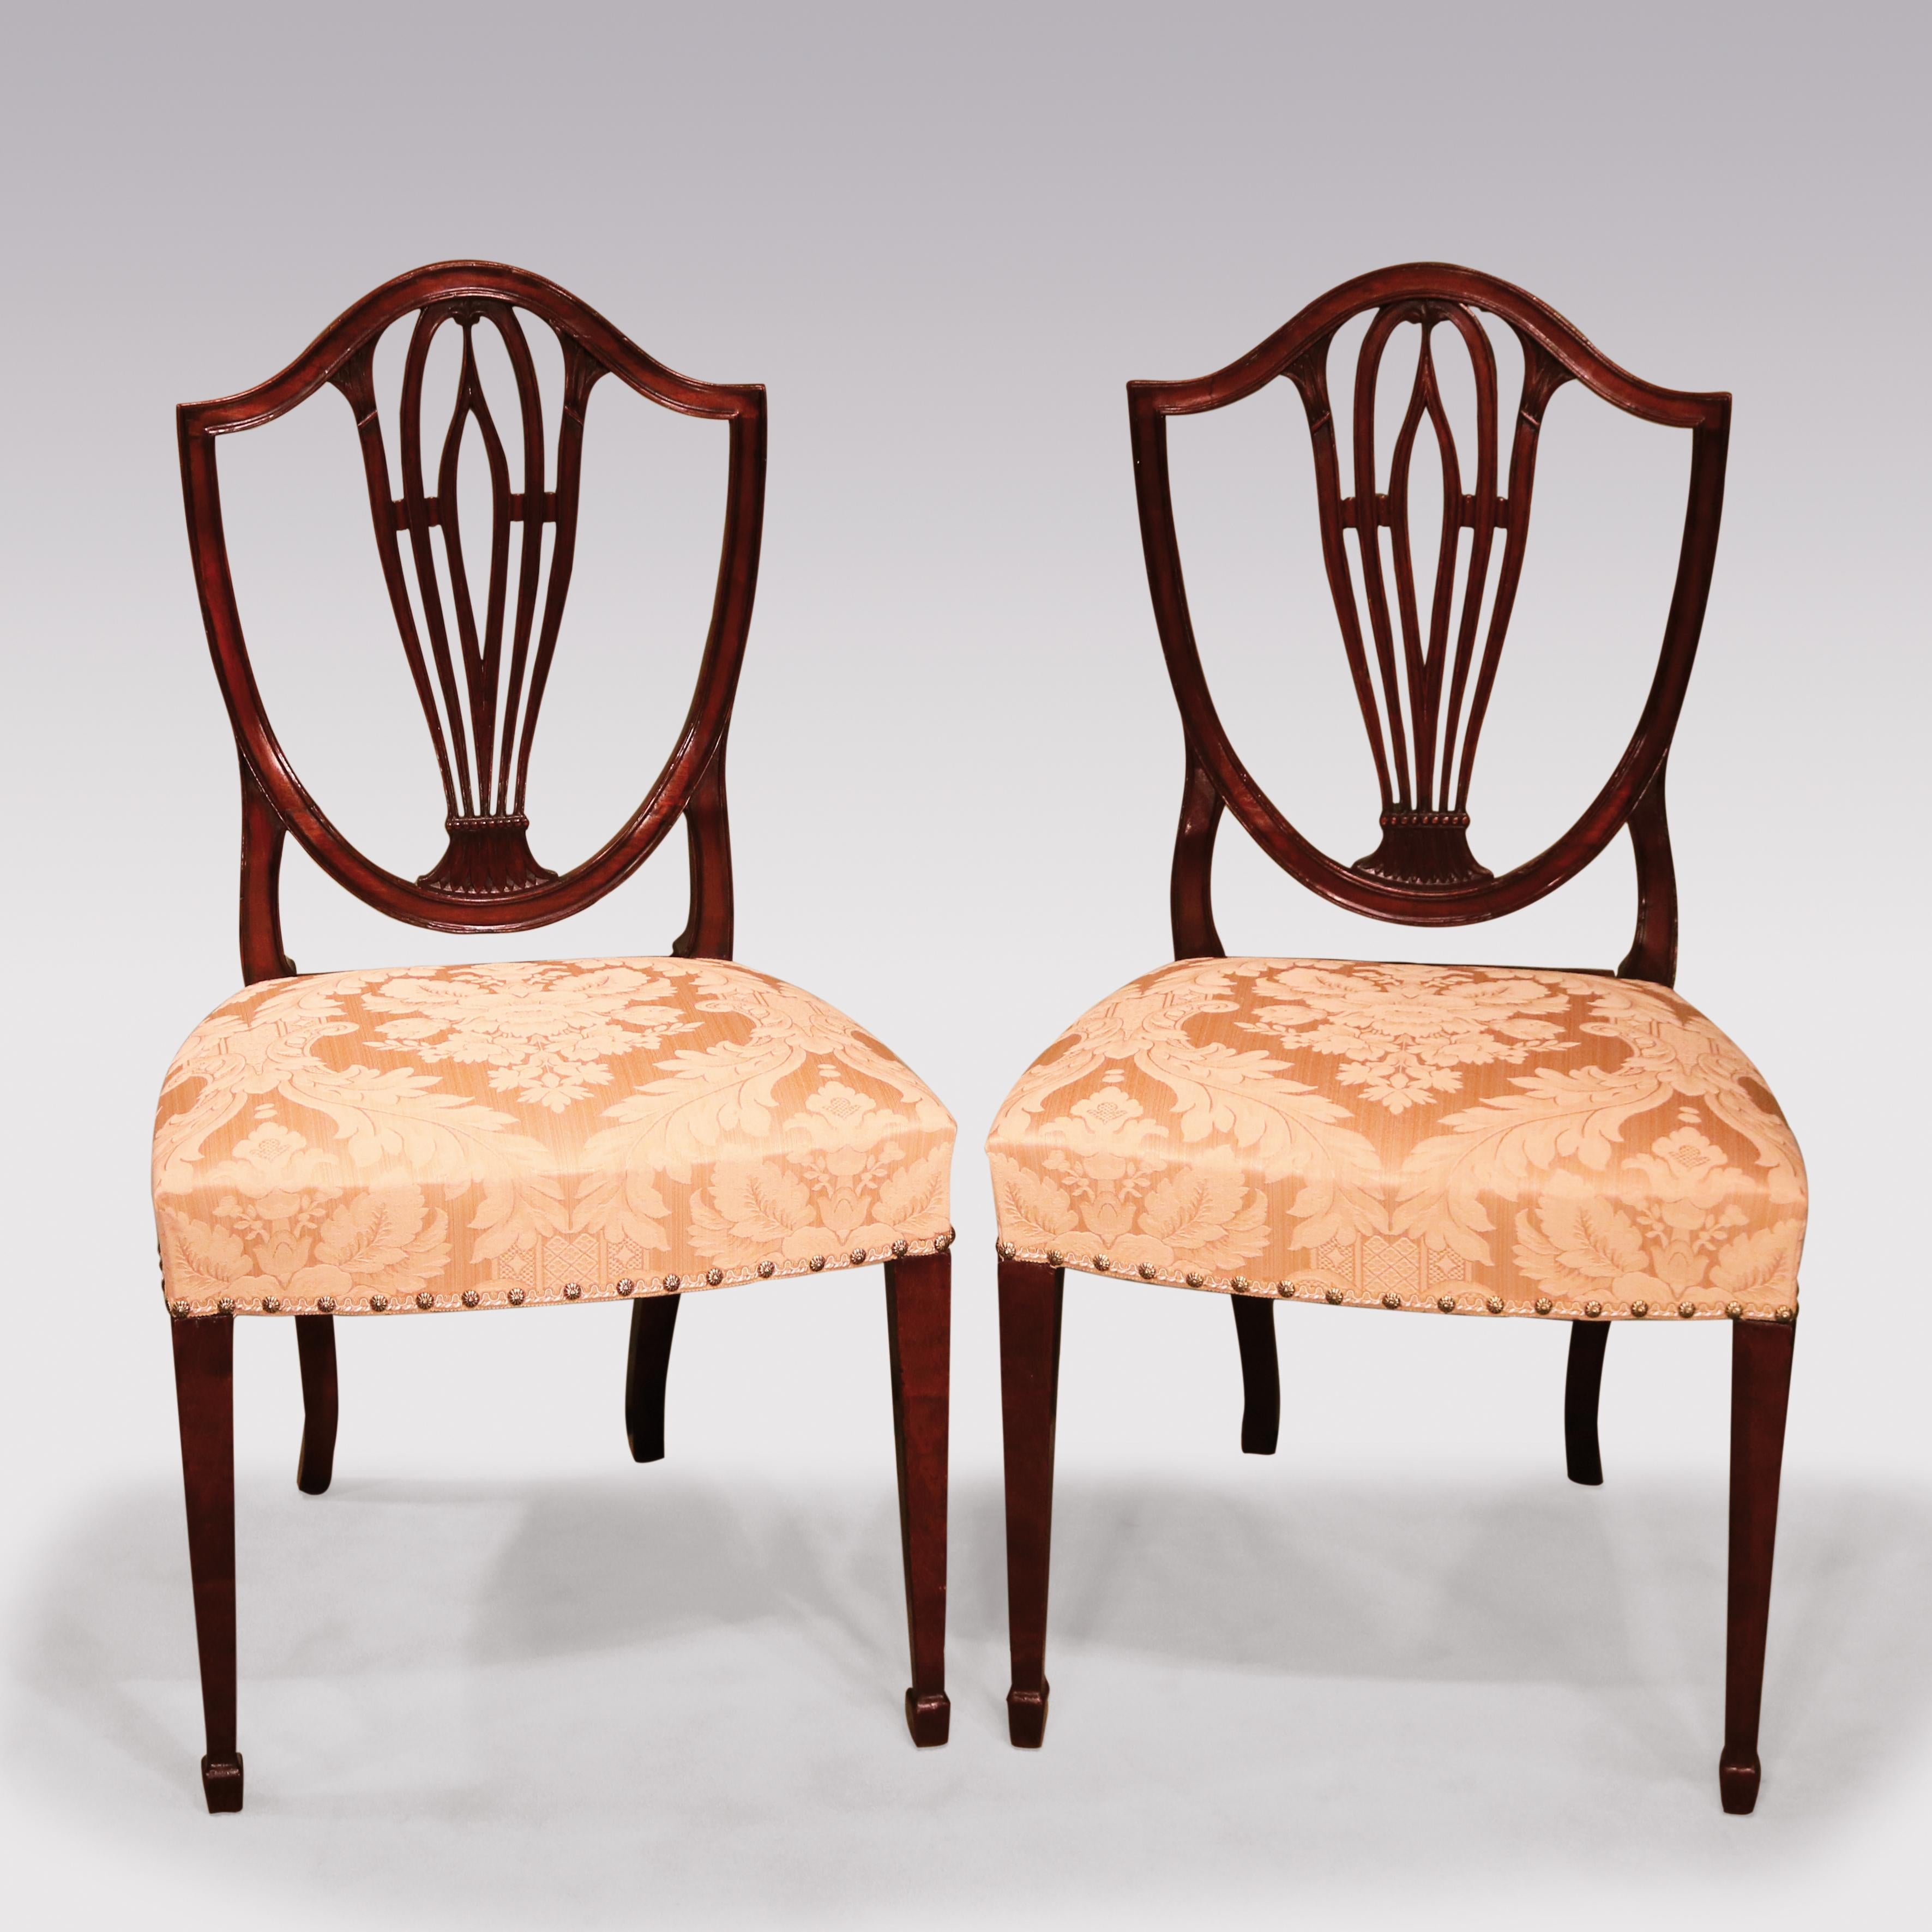 A Set of 10 single & 2 arm late 18th Century Hepplewhite period mahogany Dining chairs, having shield-shaped backs containing well-carved splats supported on spade toes. ( One side chair of later date).